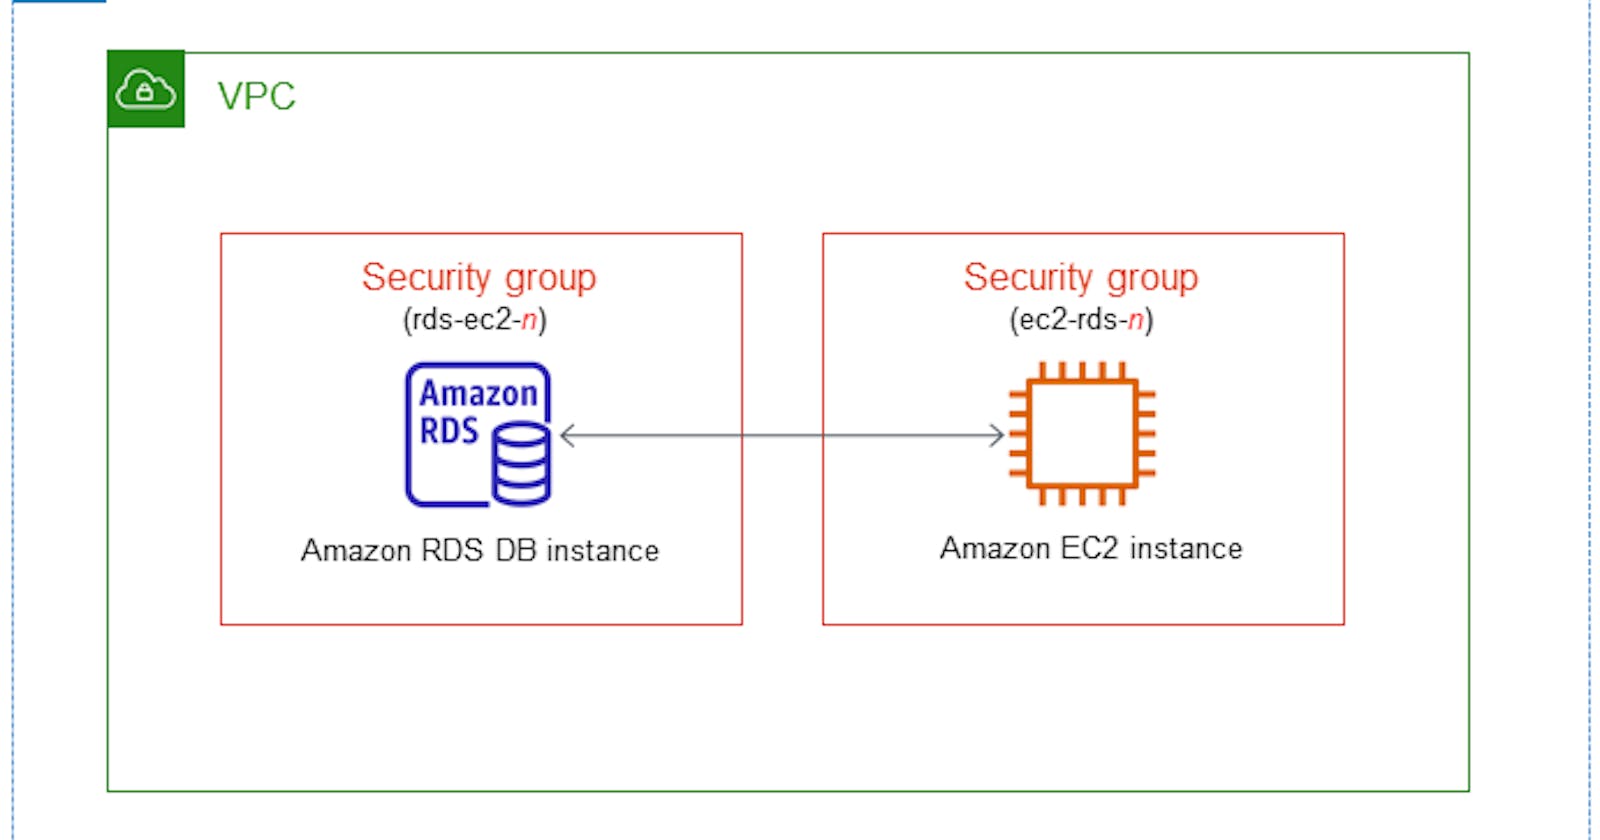 Connect  your AWS Relational Database Server running MySQL to your EC2 instance